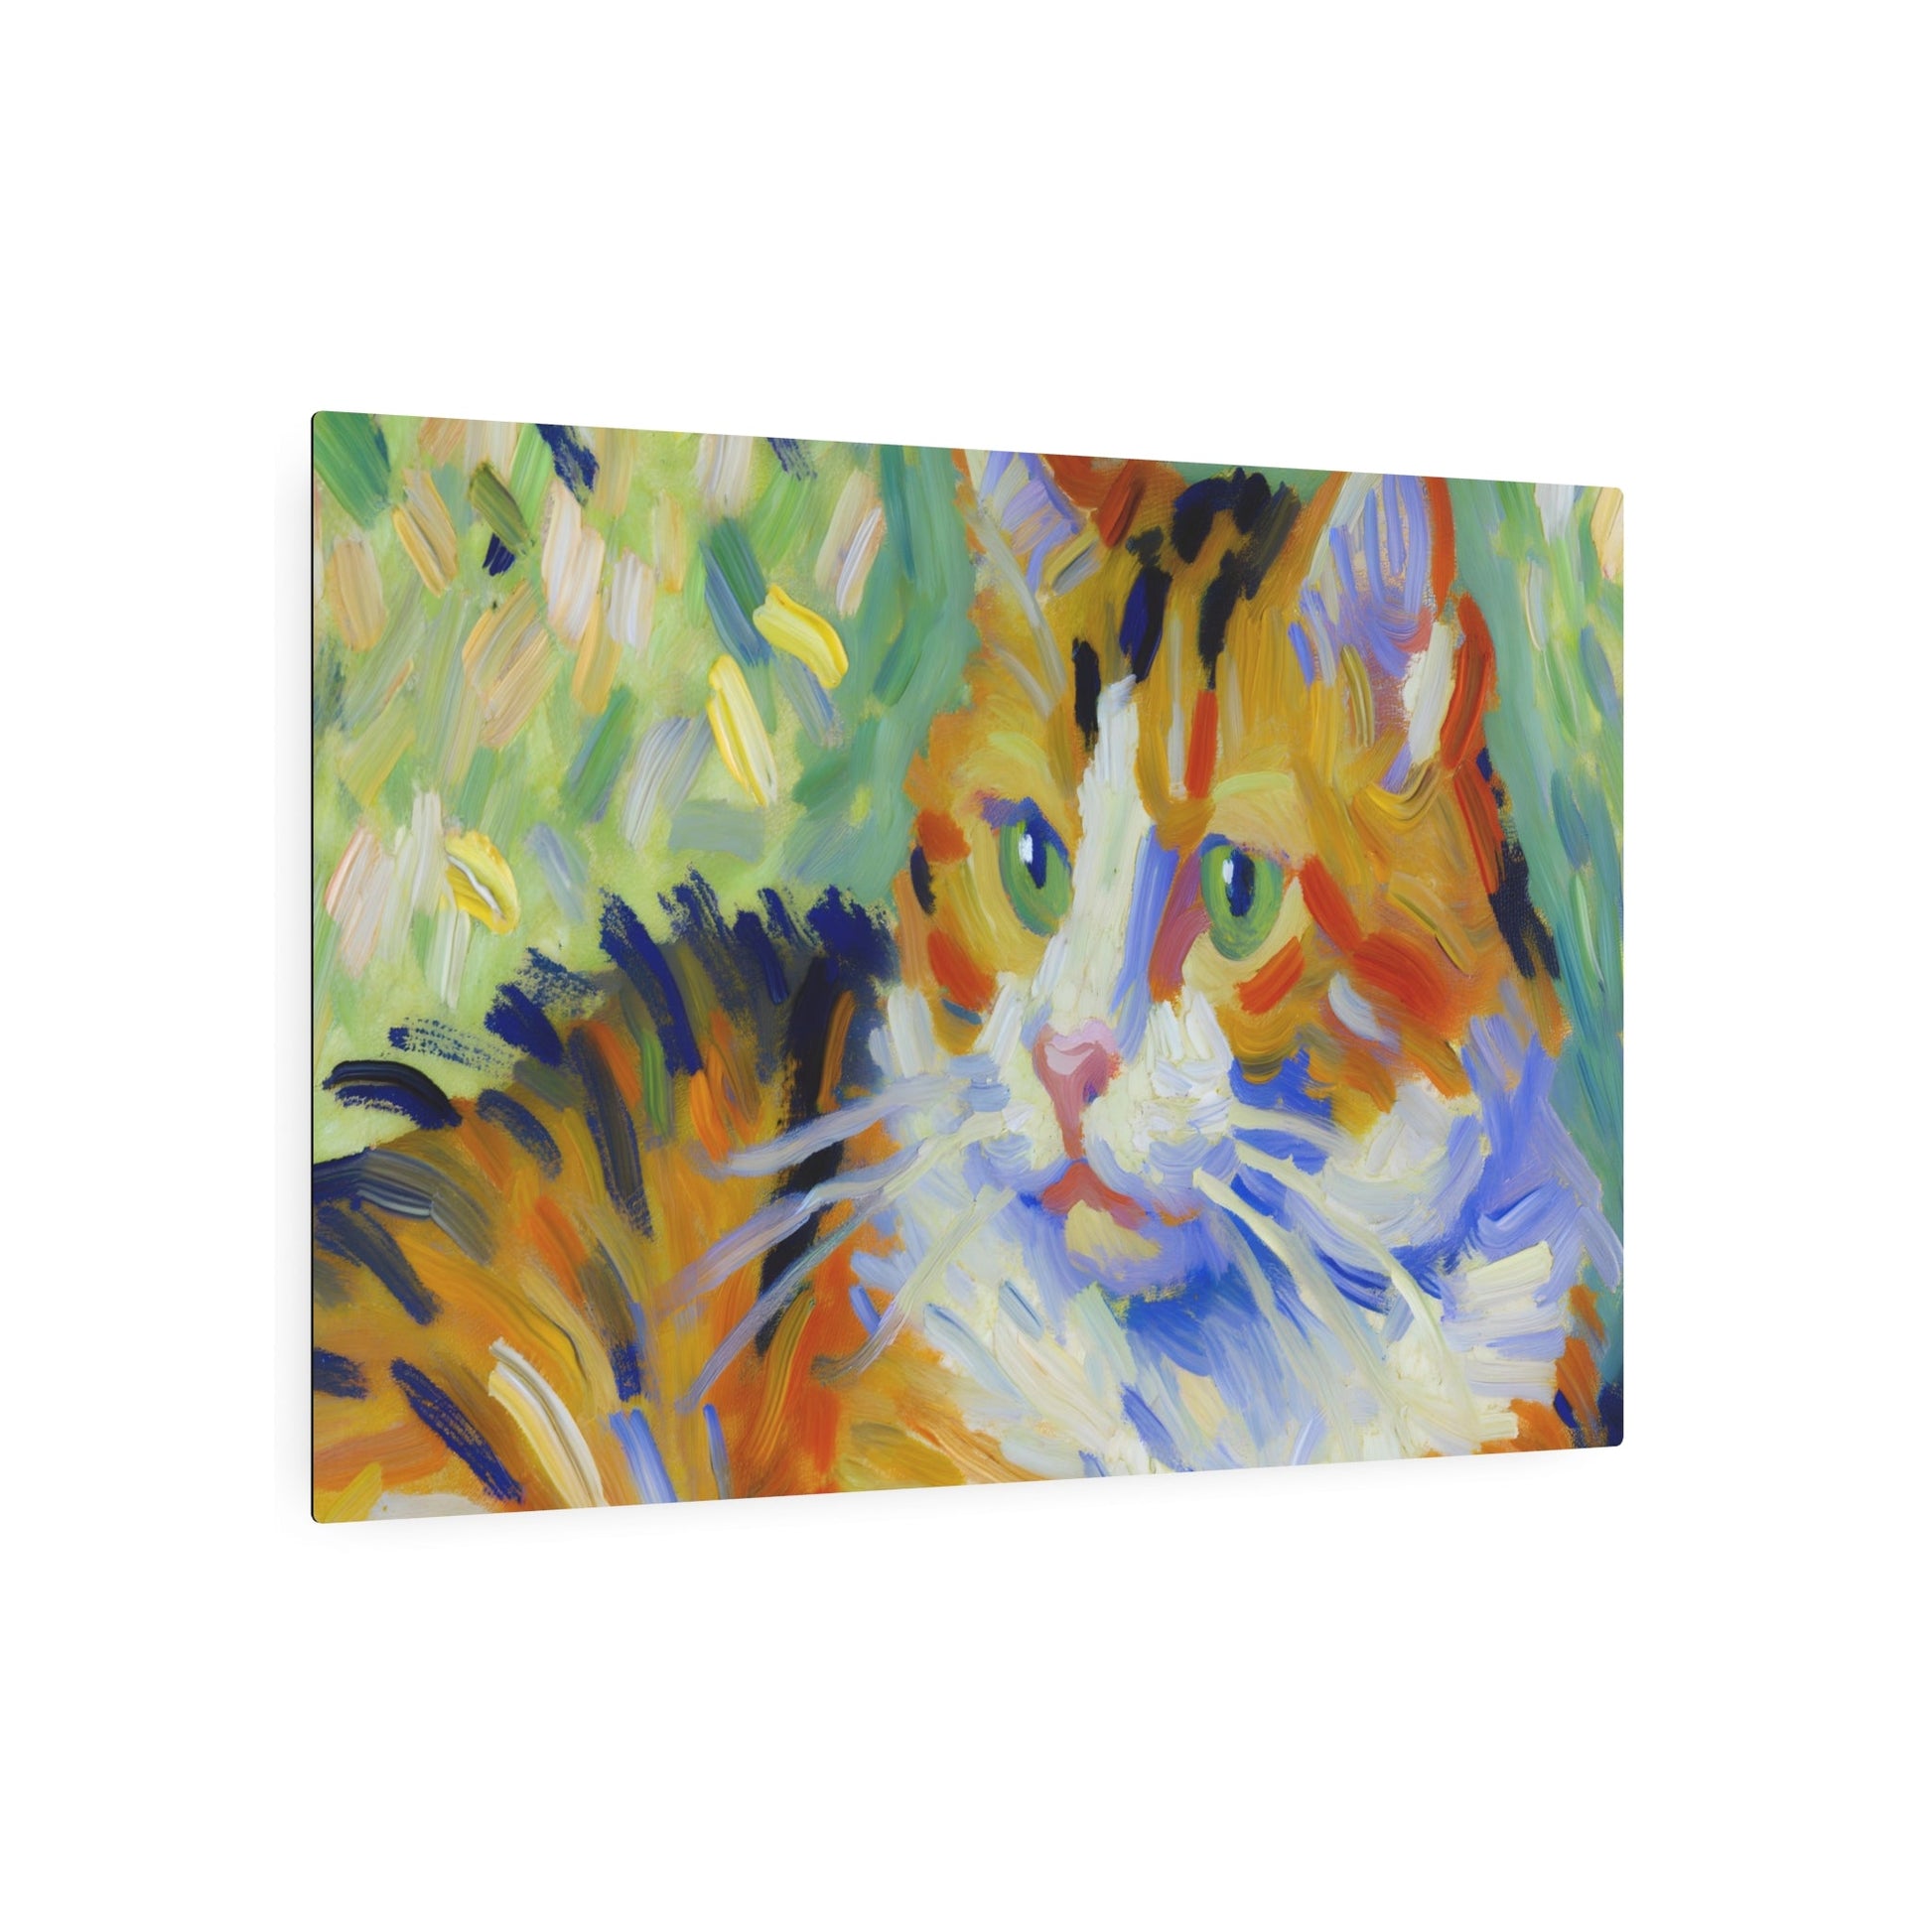 Metal Poster Art | "Vibrant Post-Impressionist Cat Painting - Expressive Colors & Visible Brushwork in Western Art Styles Collection" - Metal Poster Art 36″ x 24″ (Horizontal) 0.12''